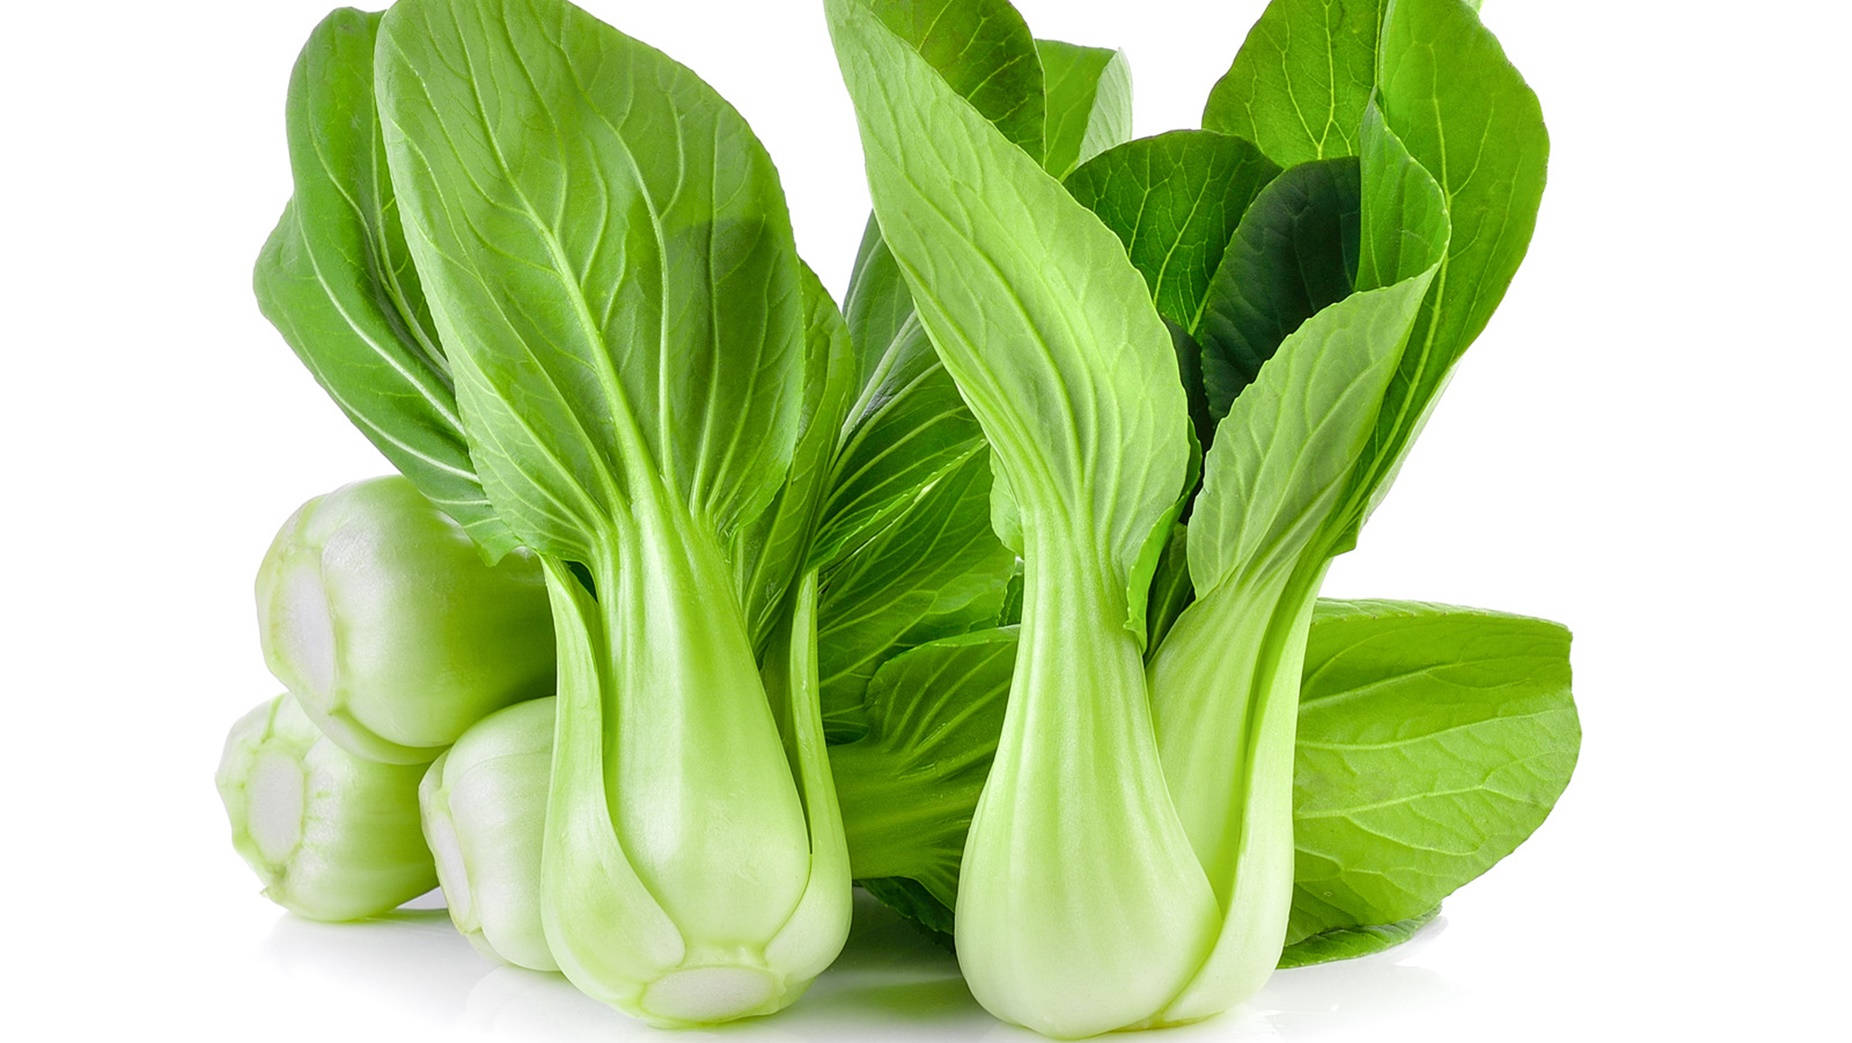 Fresh Raw Bok Choy Cabbages Wallpaper